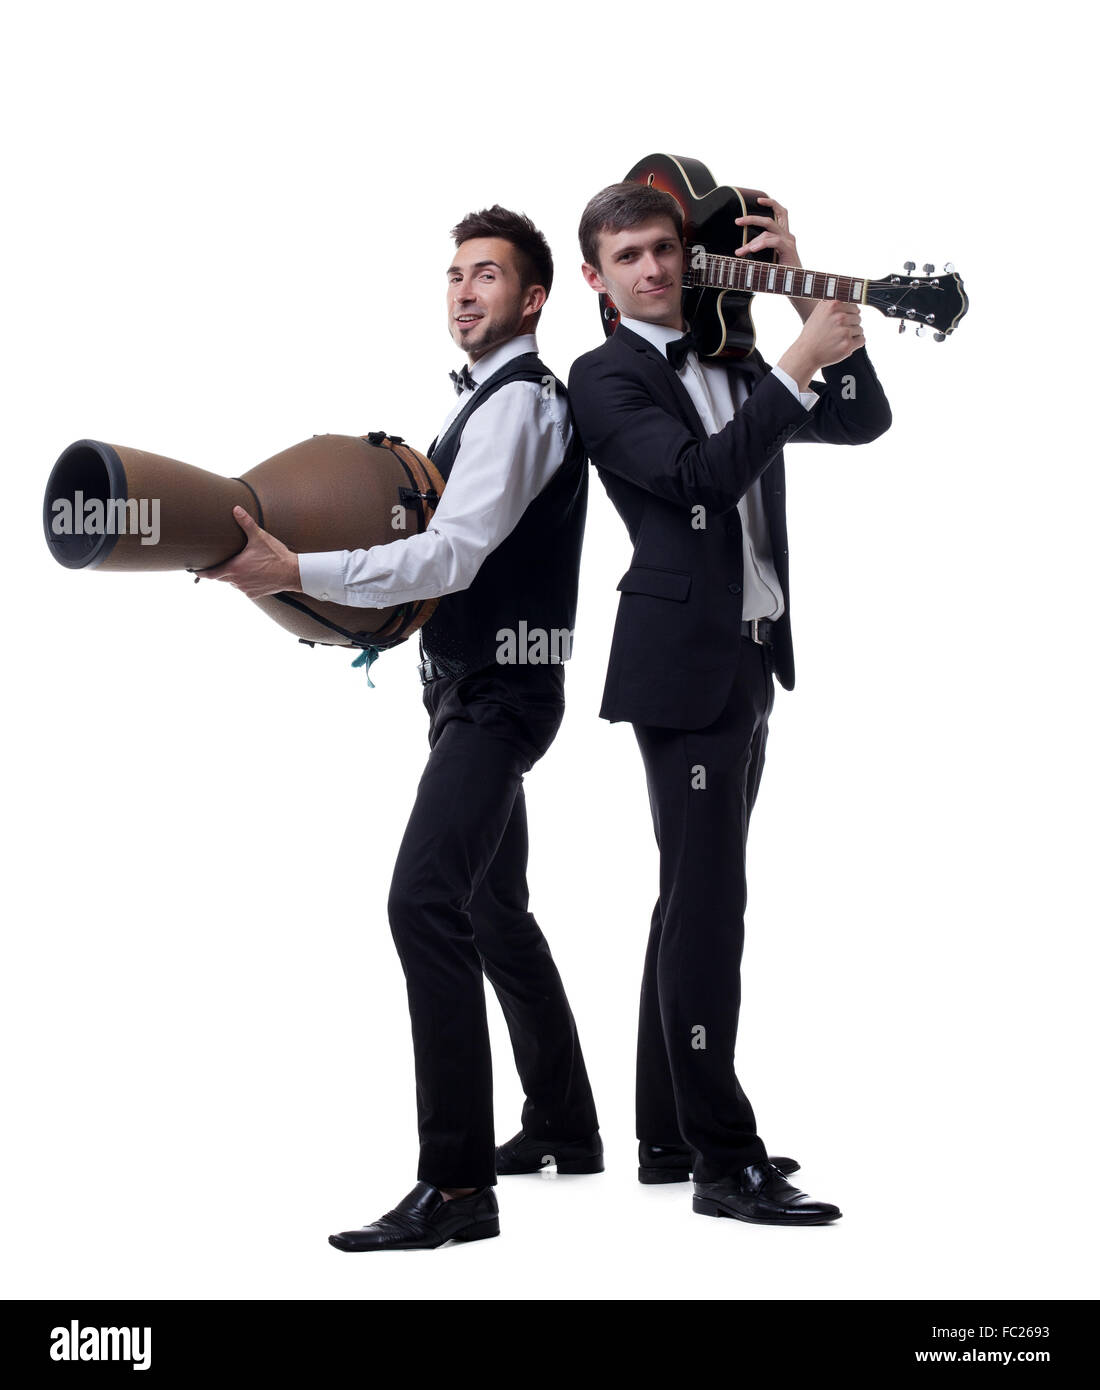 Funny guys posing with musical instruments Stock Photo